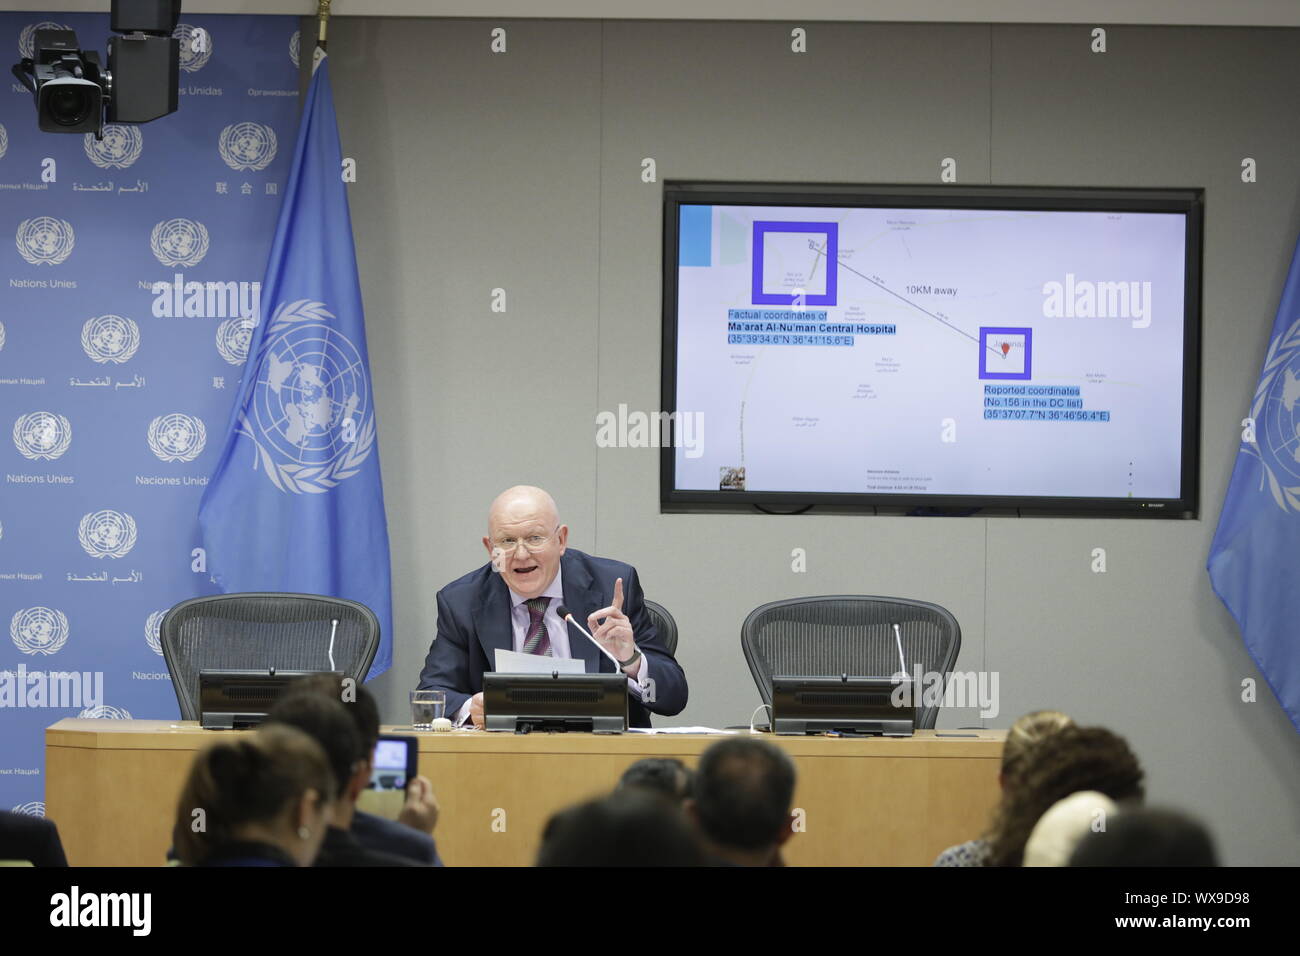 United Nations, UN headquarters in New York. 16th Sep, 2019. Vassily Nebenzia, Russian permanent representative to the United Nations and president of the UN Security Council for the month of September, speaks to journalists during a press conference on the situation in Syria, at the UN headquarters in New York, on Sept. 16, 2019. Russia's UN envoy said Monday that the latest ceasefire for Syria's Idlib has been breached by Jihadist rebels. Credit: Li Muzi/Xinhua/Alamy Live News Stock Photo